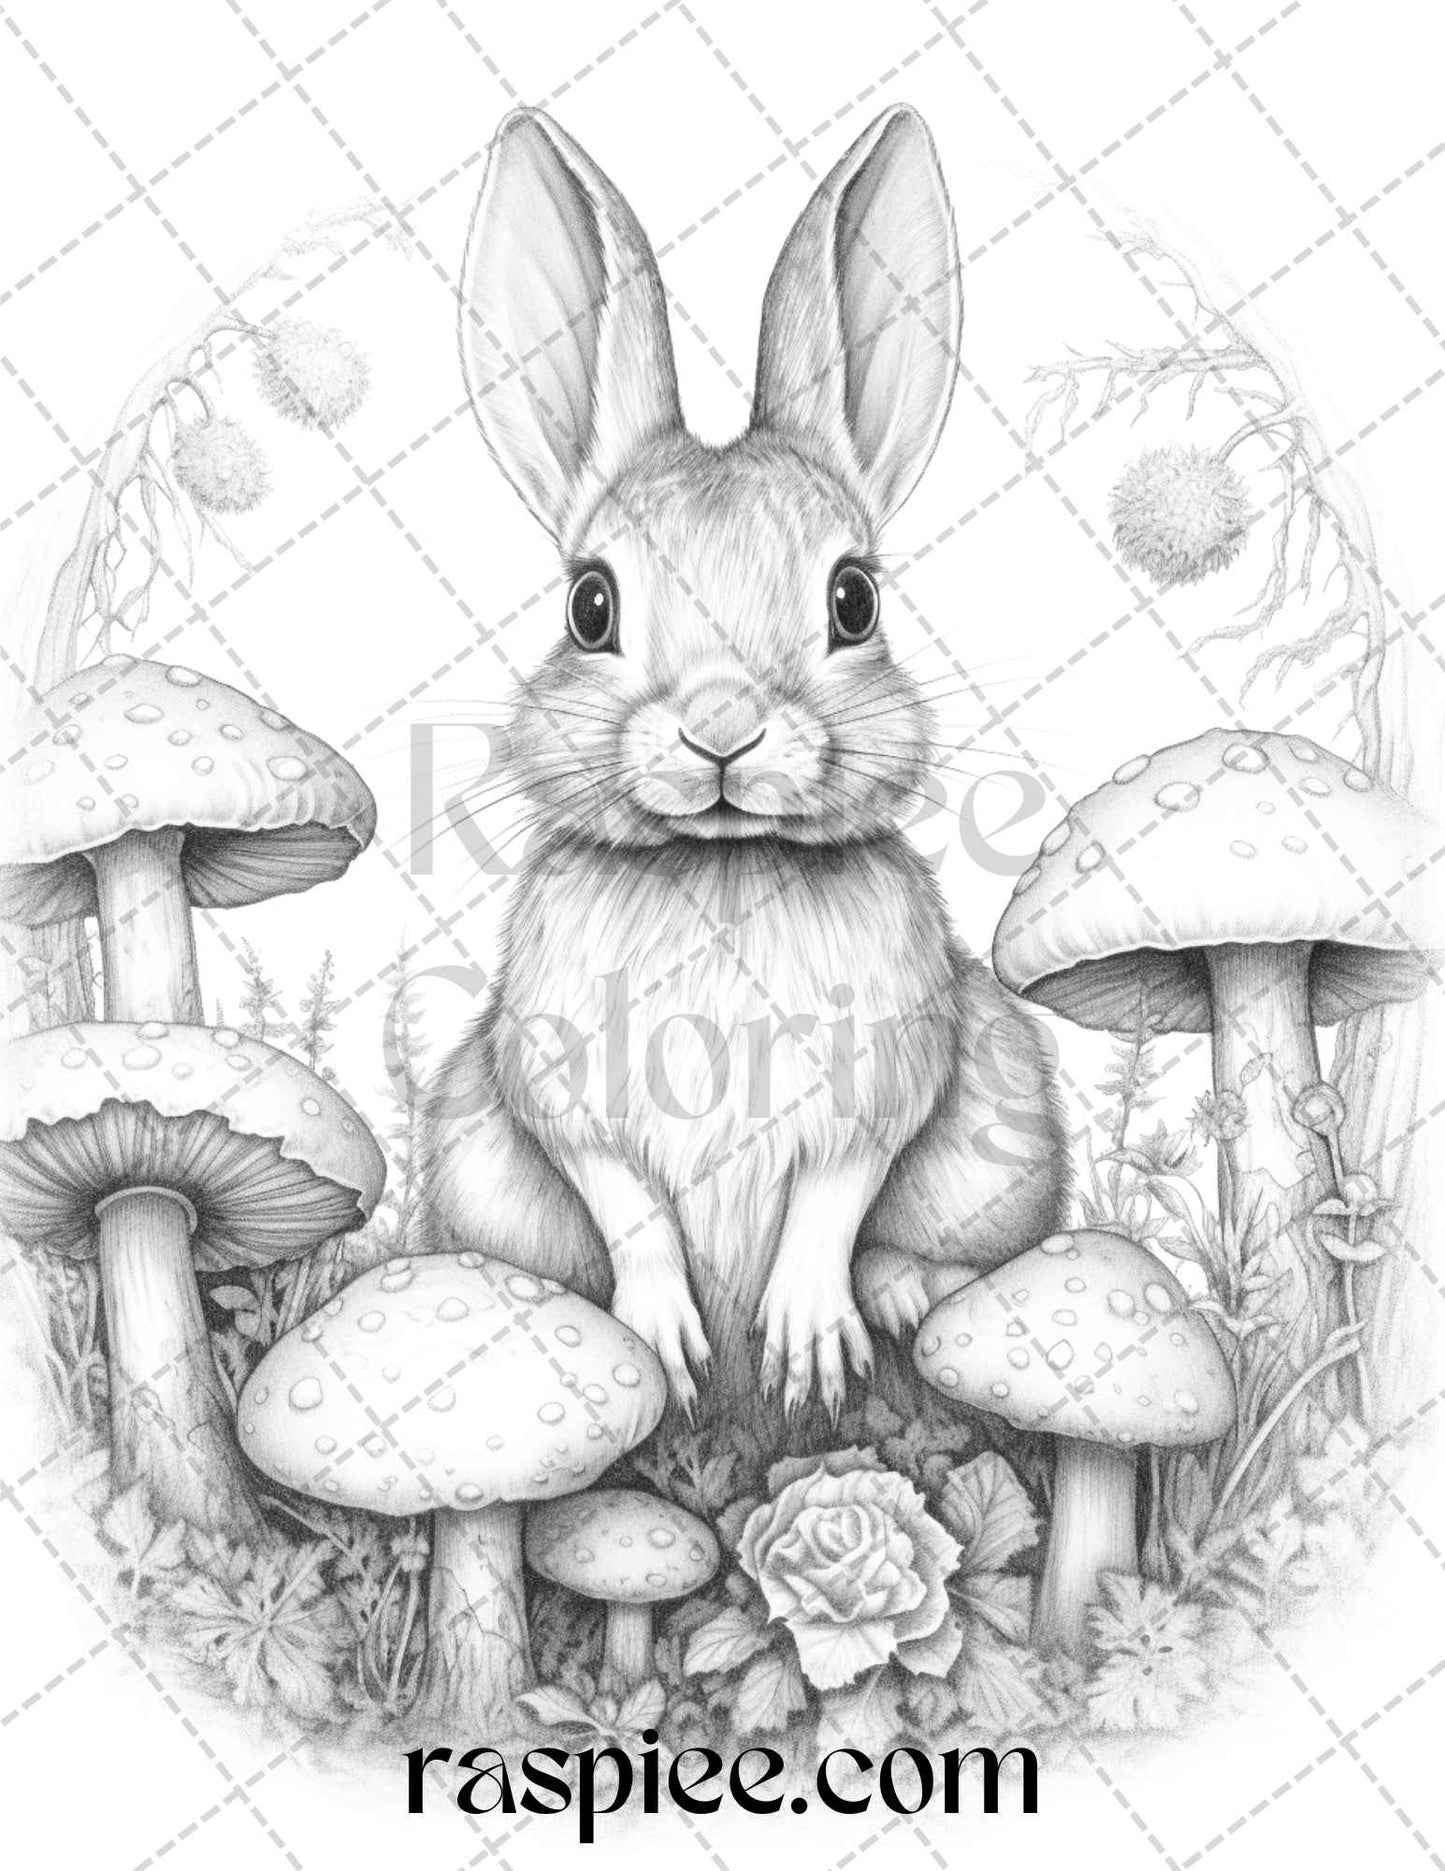 Rabbit Garden Grayscale Coloring Page, Adult Coloring Page Printable, Detailed Rabbit Art for Coloring, Animal Coloring Page for Adults